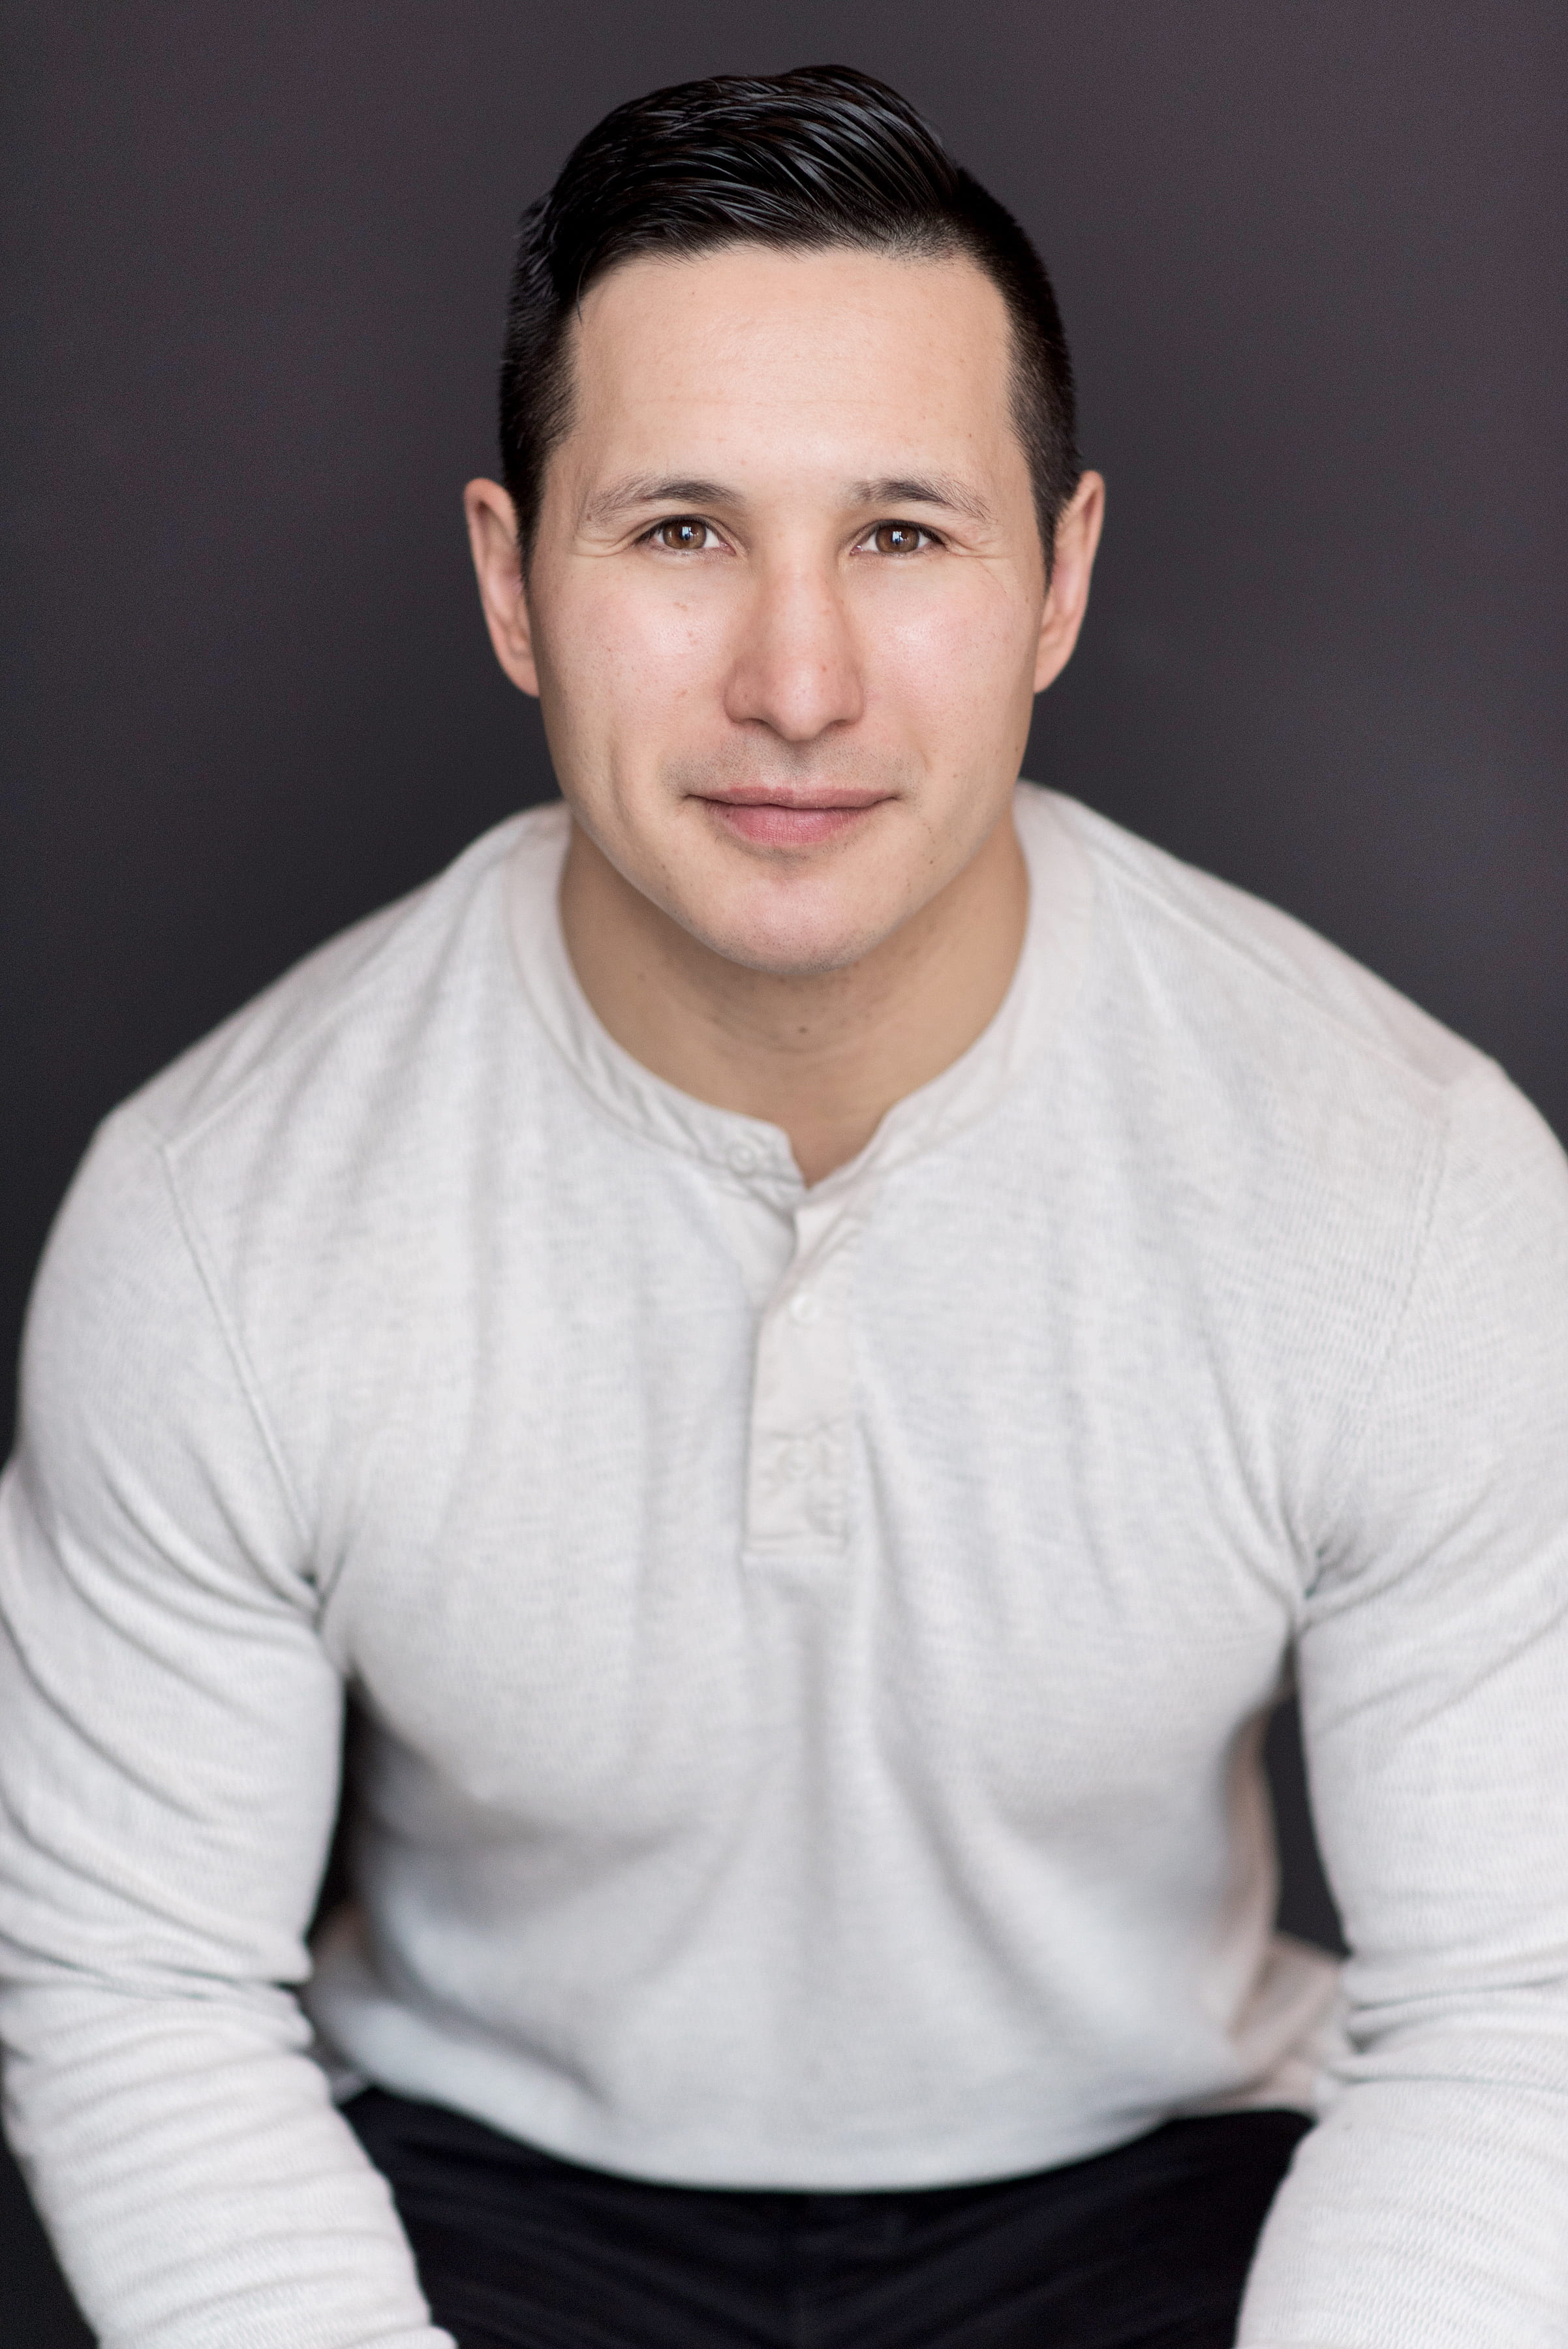 Former NHL player Jordin Tootoo set to open the 2022 CCA Annual Conference  - Canadian Construction Association